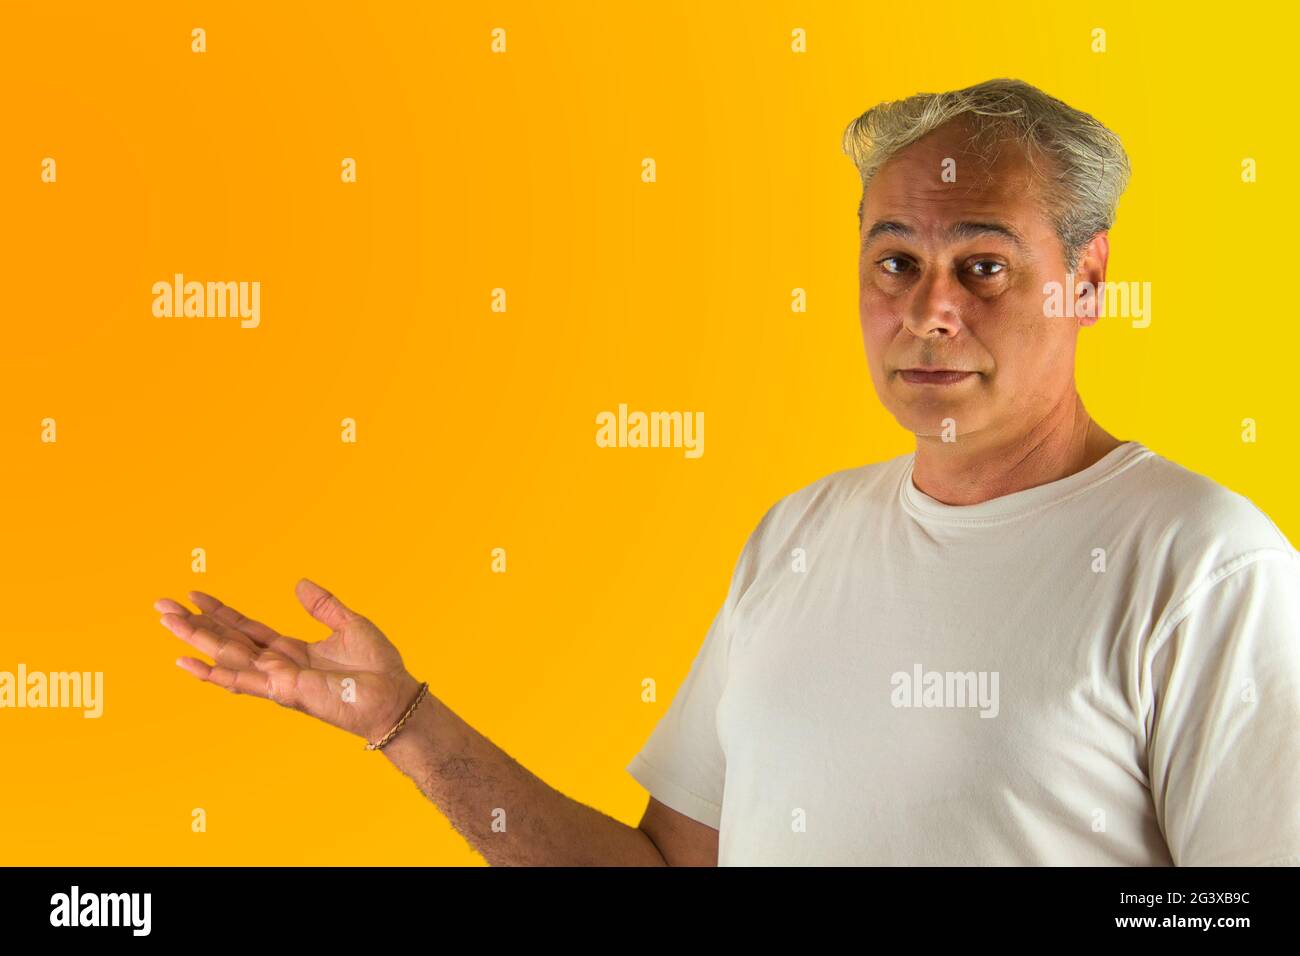 gray haired man showing something with his hand on a yellow and orange background Stock Photo